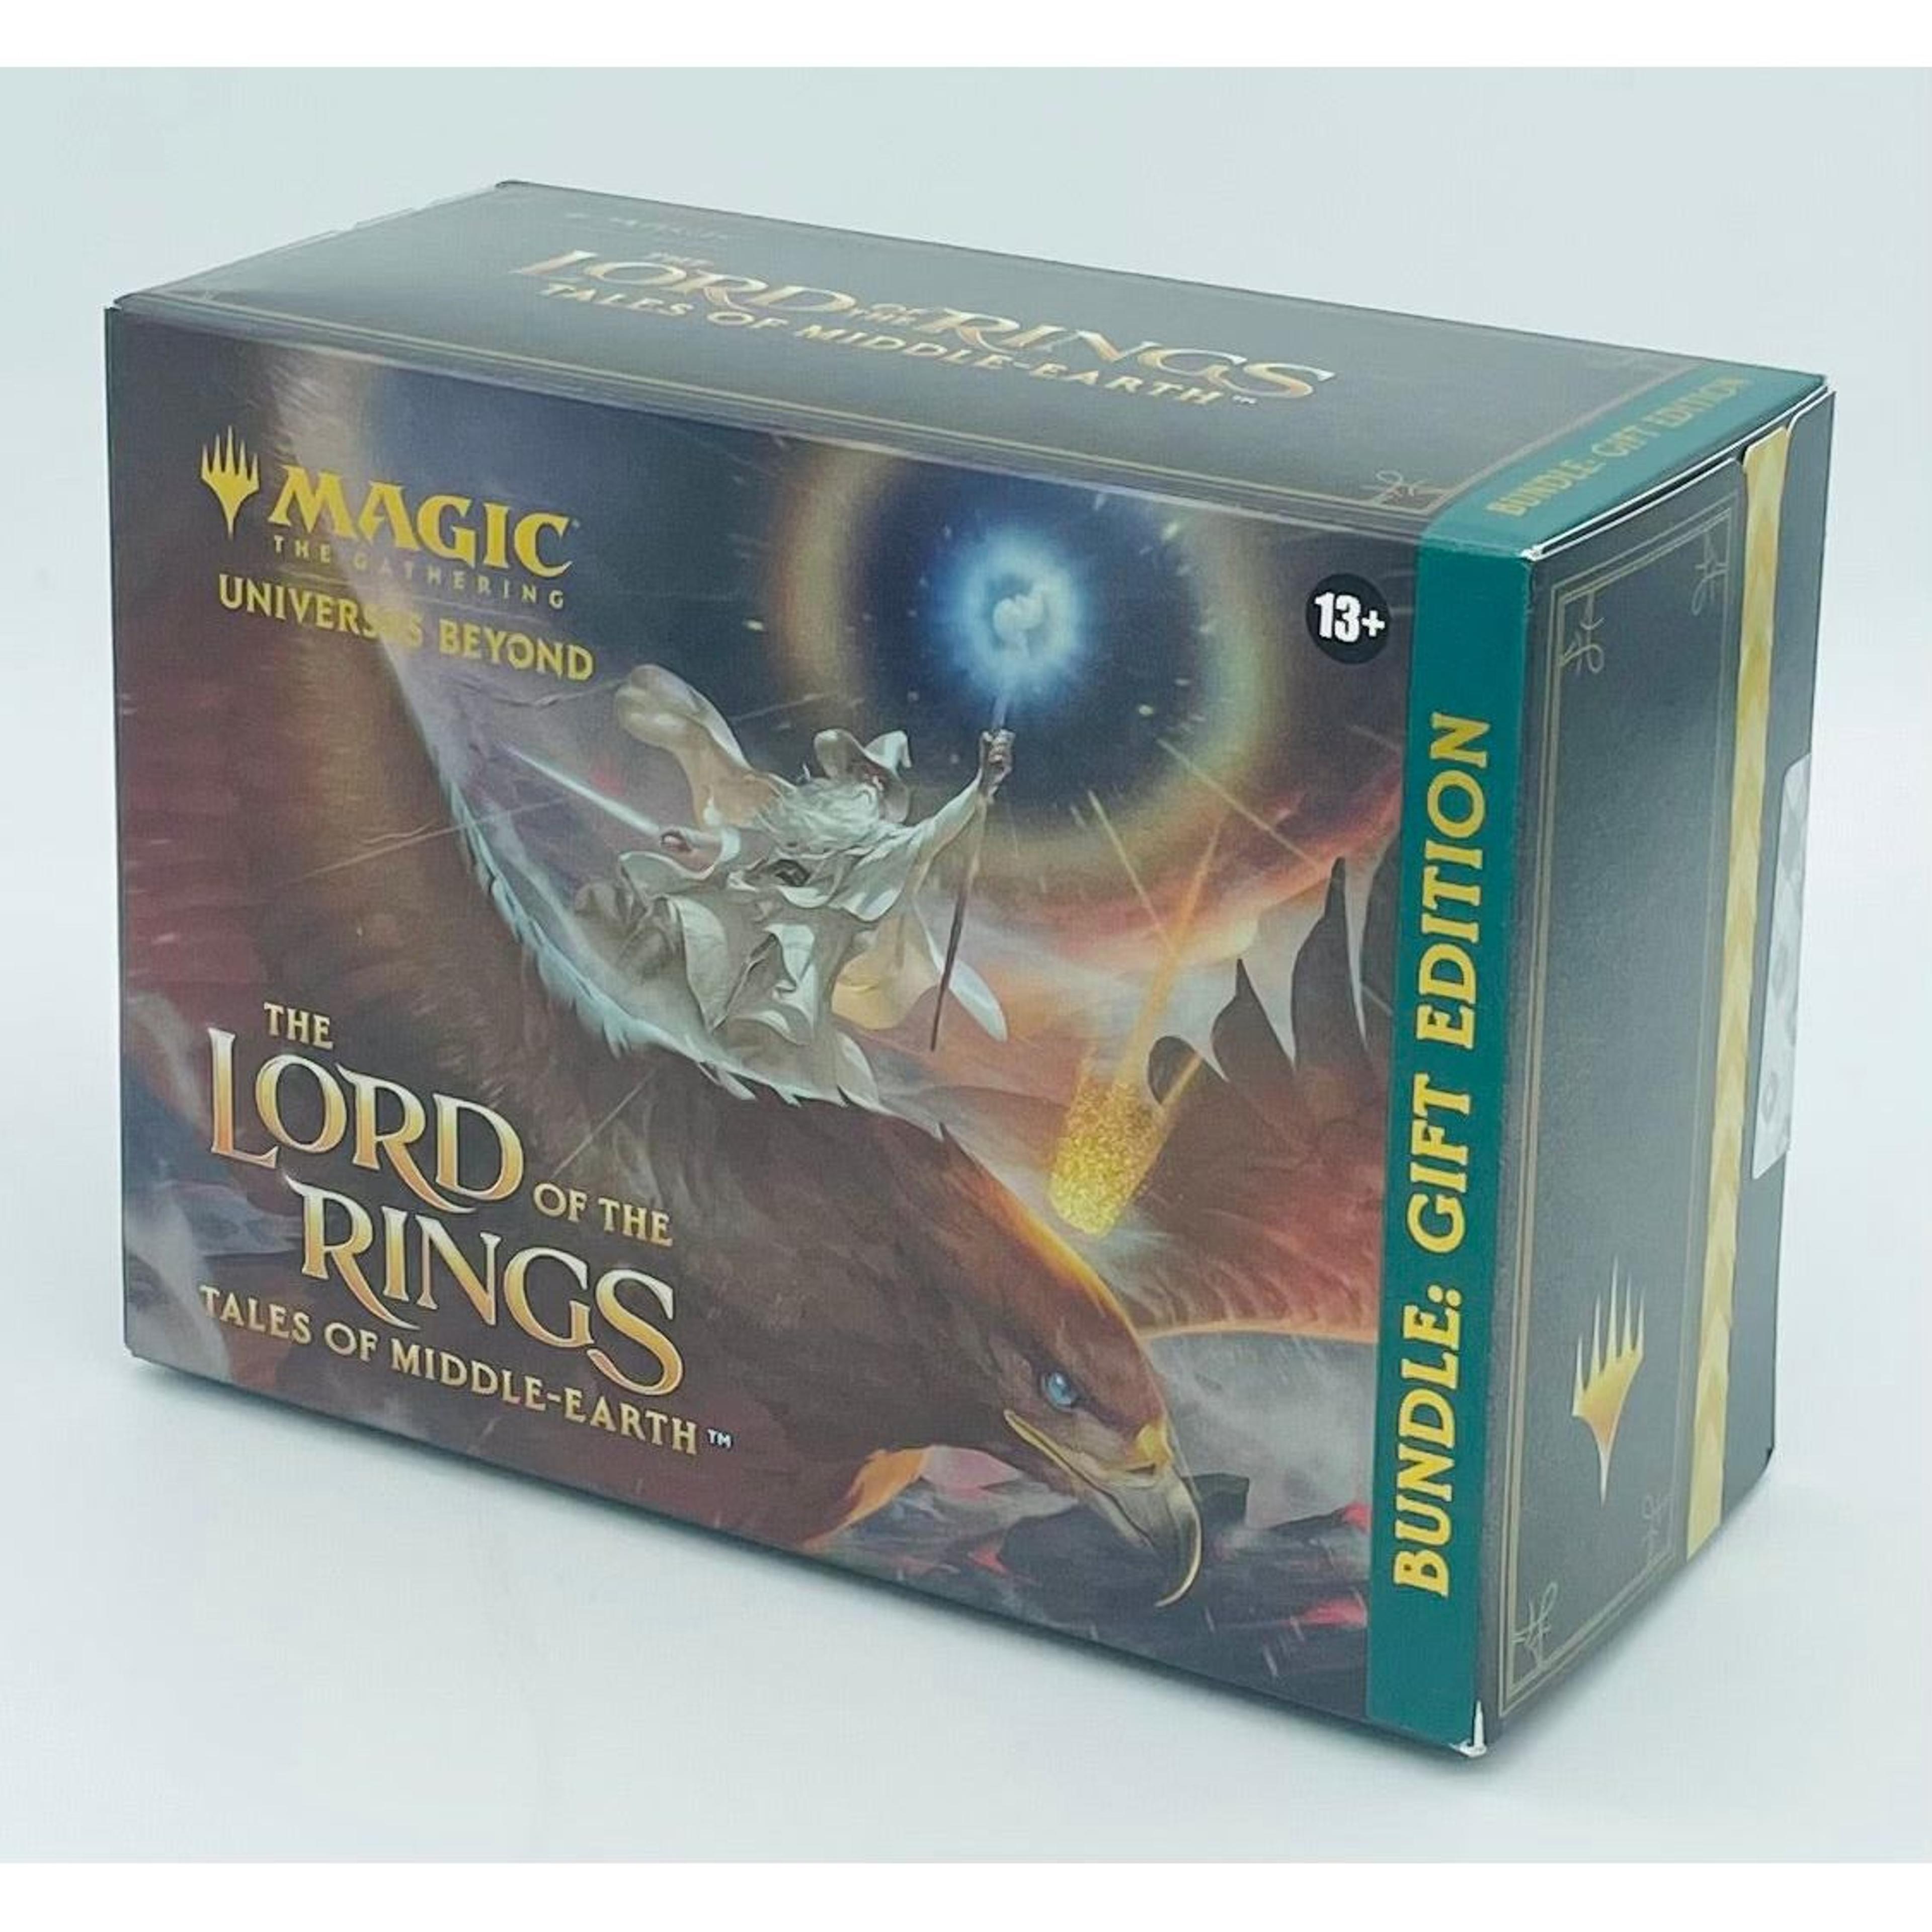 Magic the Gathering: The Lord of the Rings: Tales of Middle-Earth